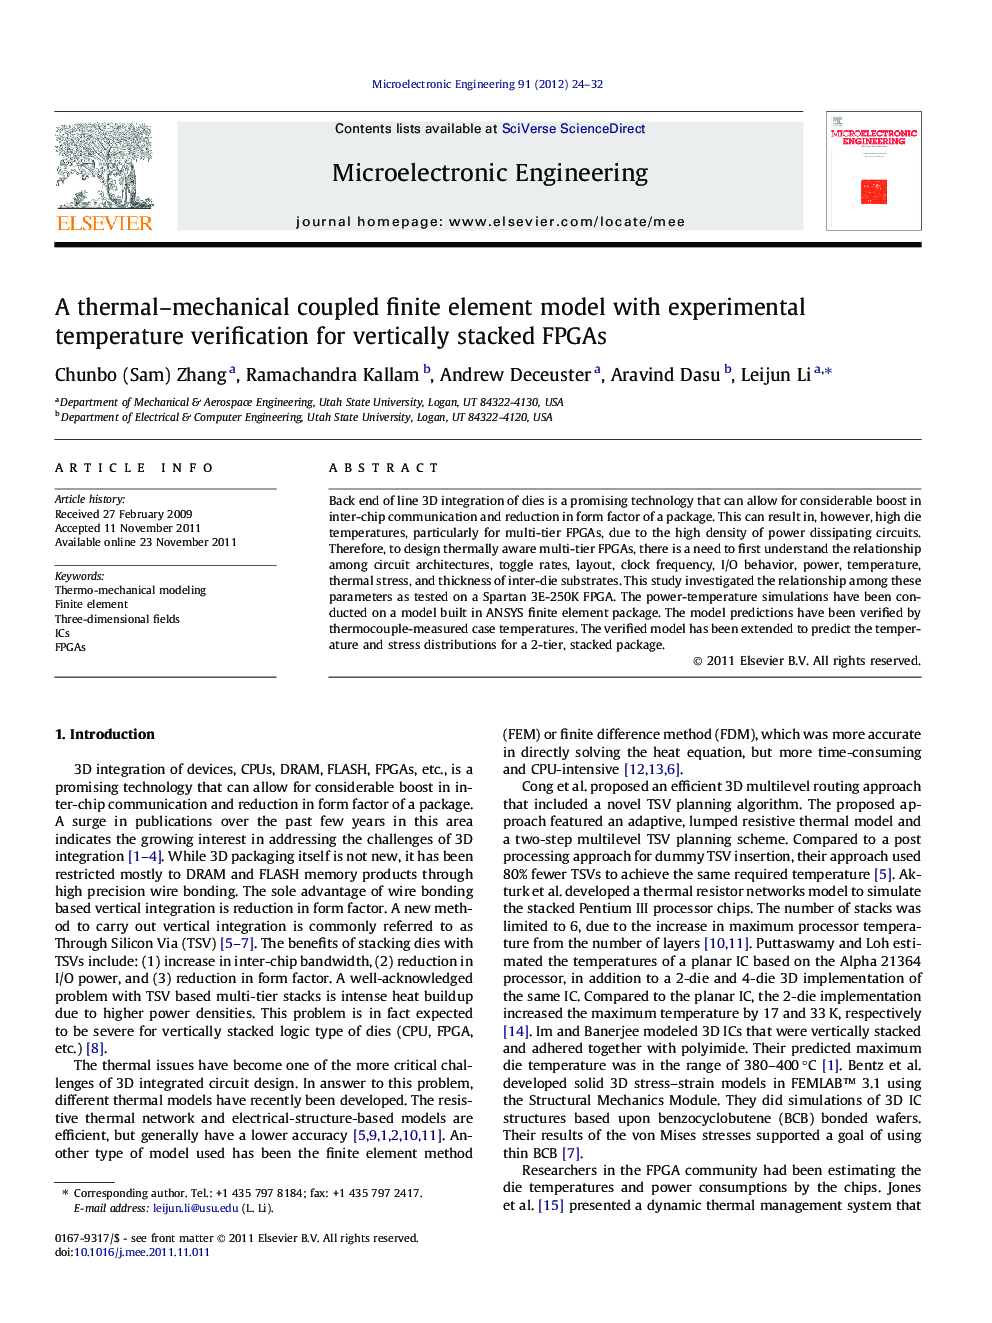 A thermal–mechanical coupled finite element model with experimental temperature verification for vertically stacked FPGAs